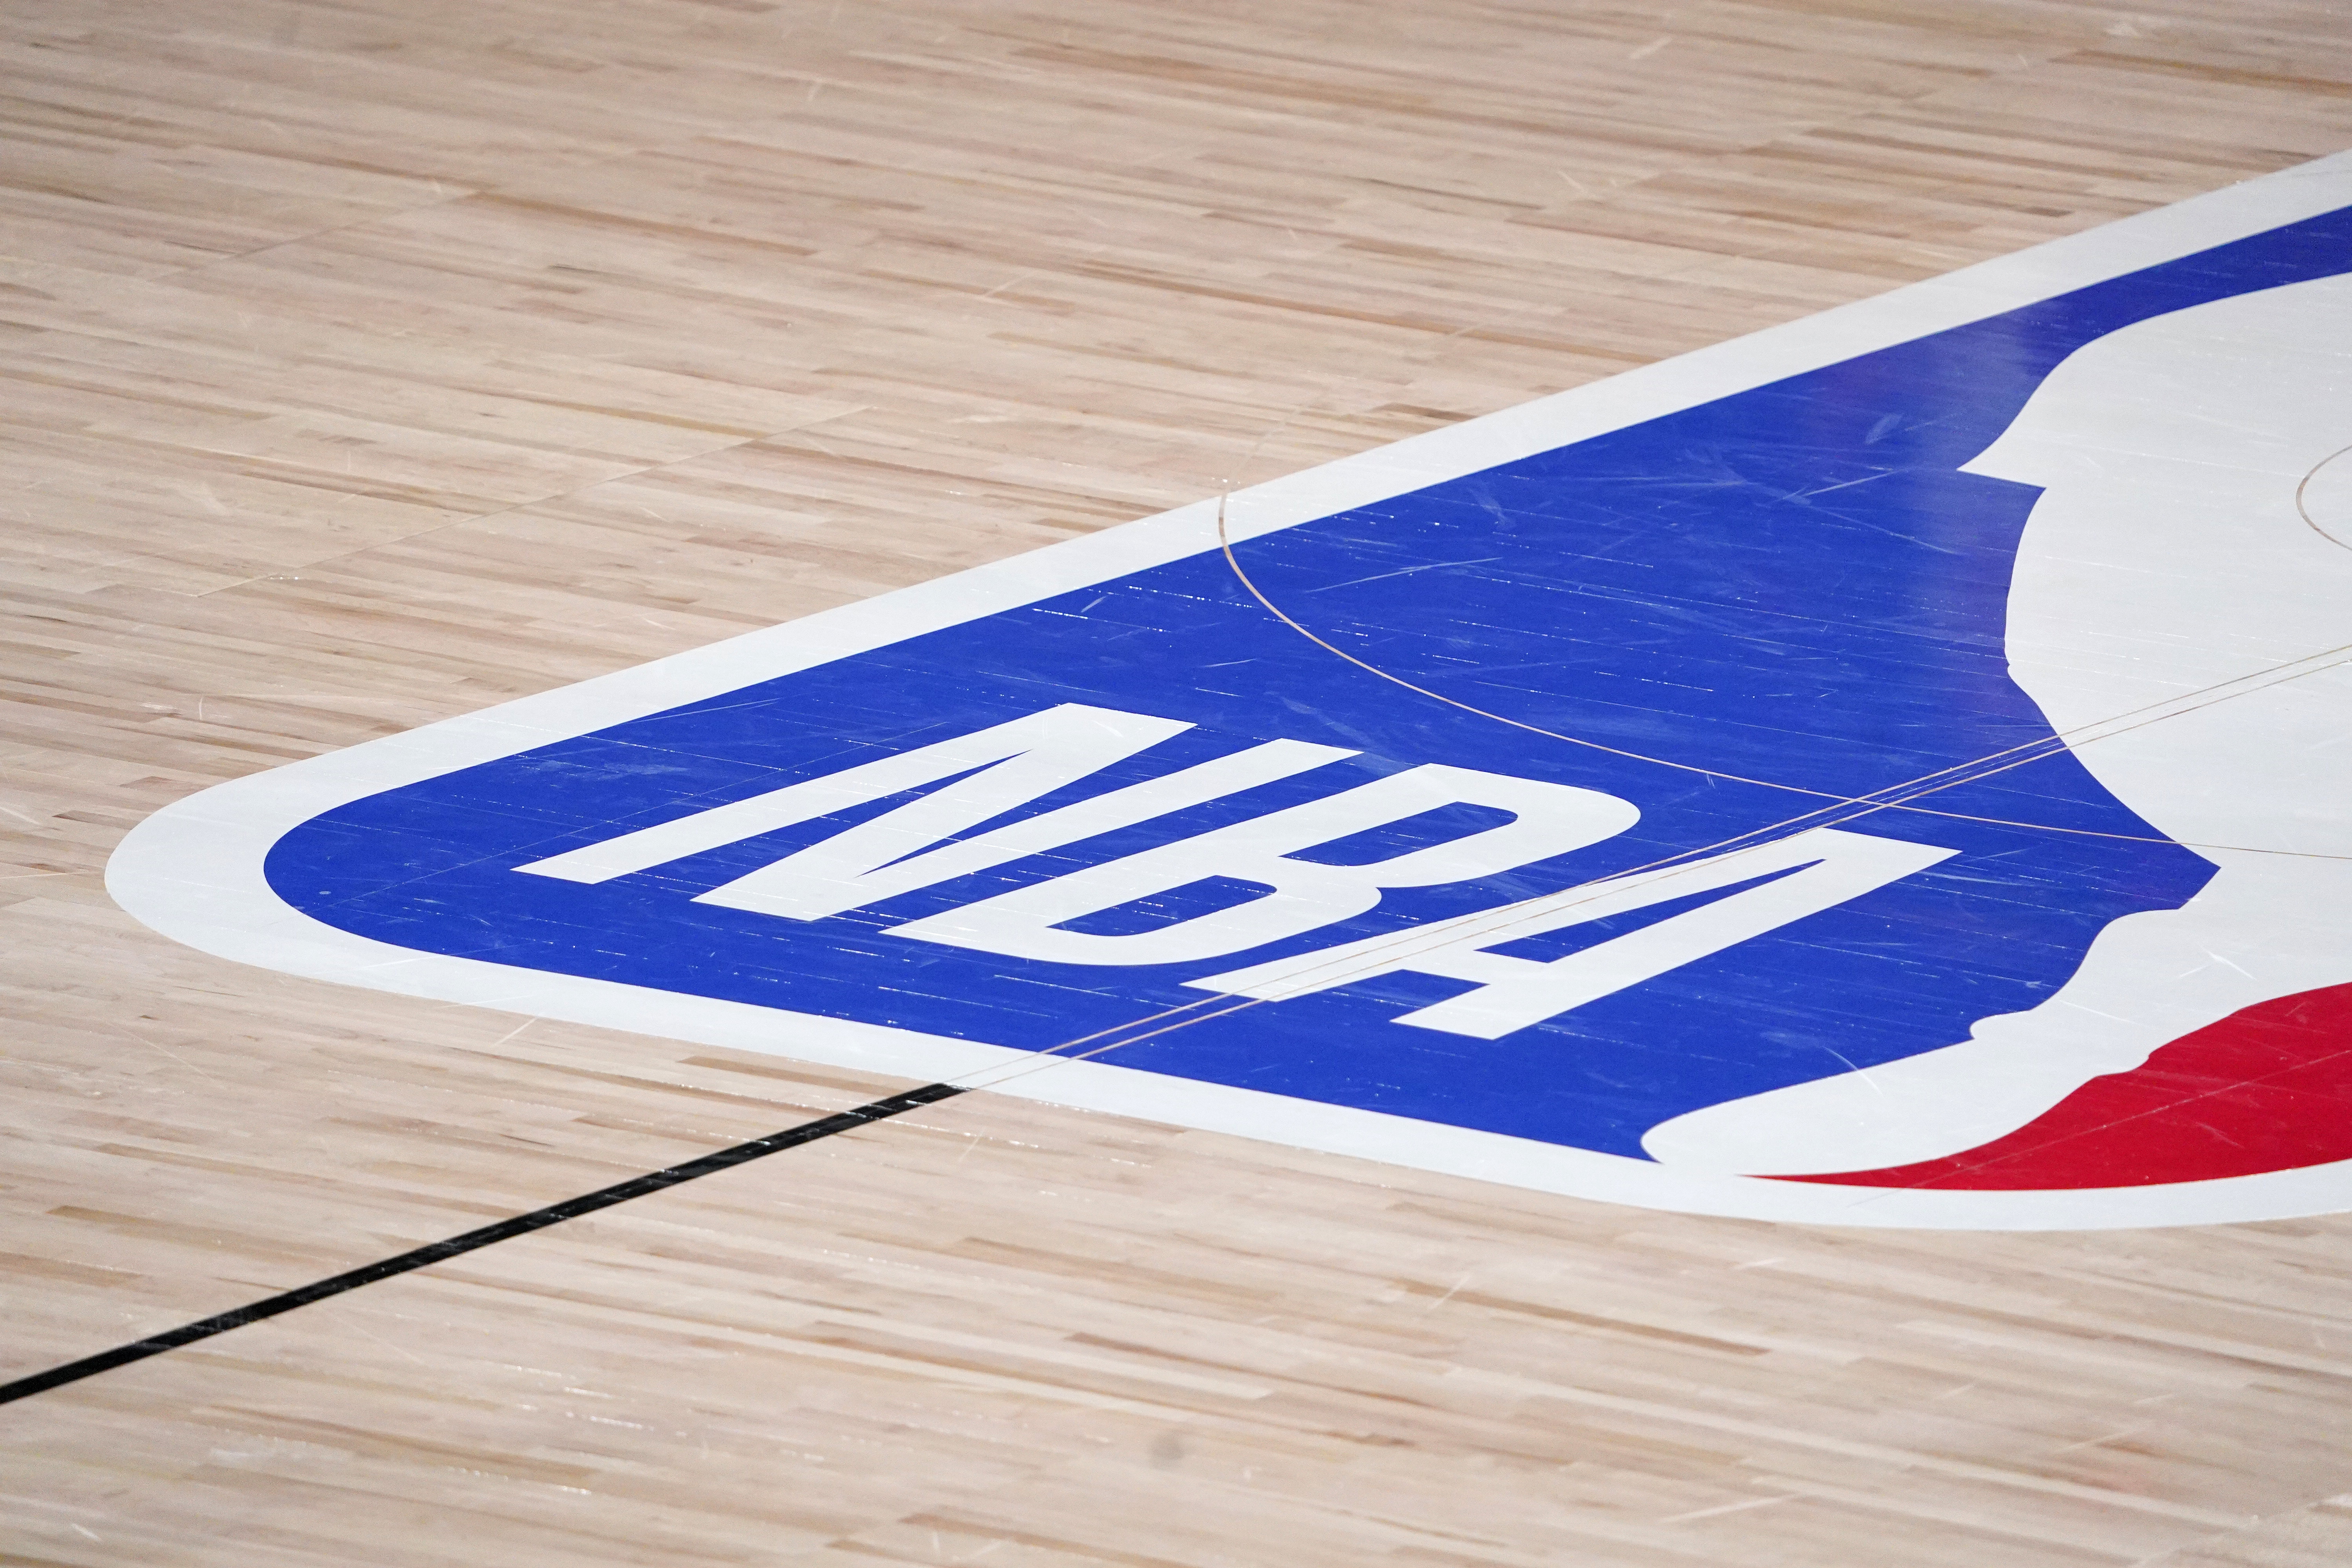 Everything you need to know about the NBA's 75th Anniversary Season